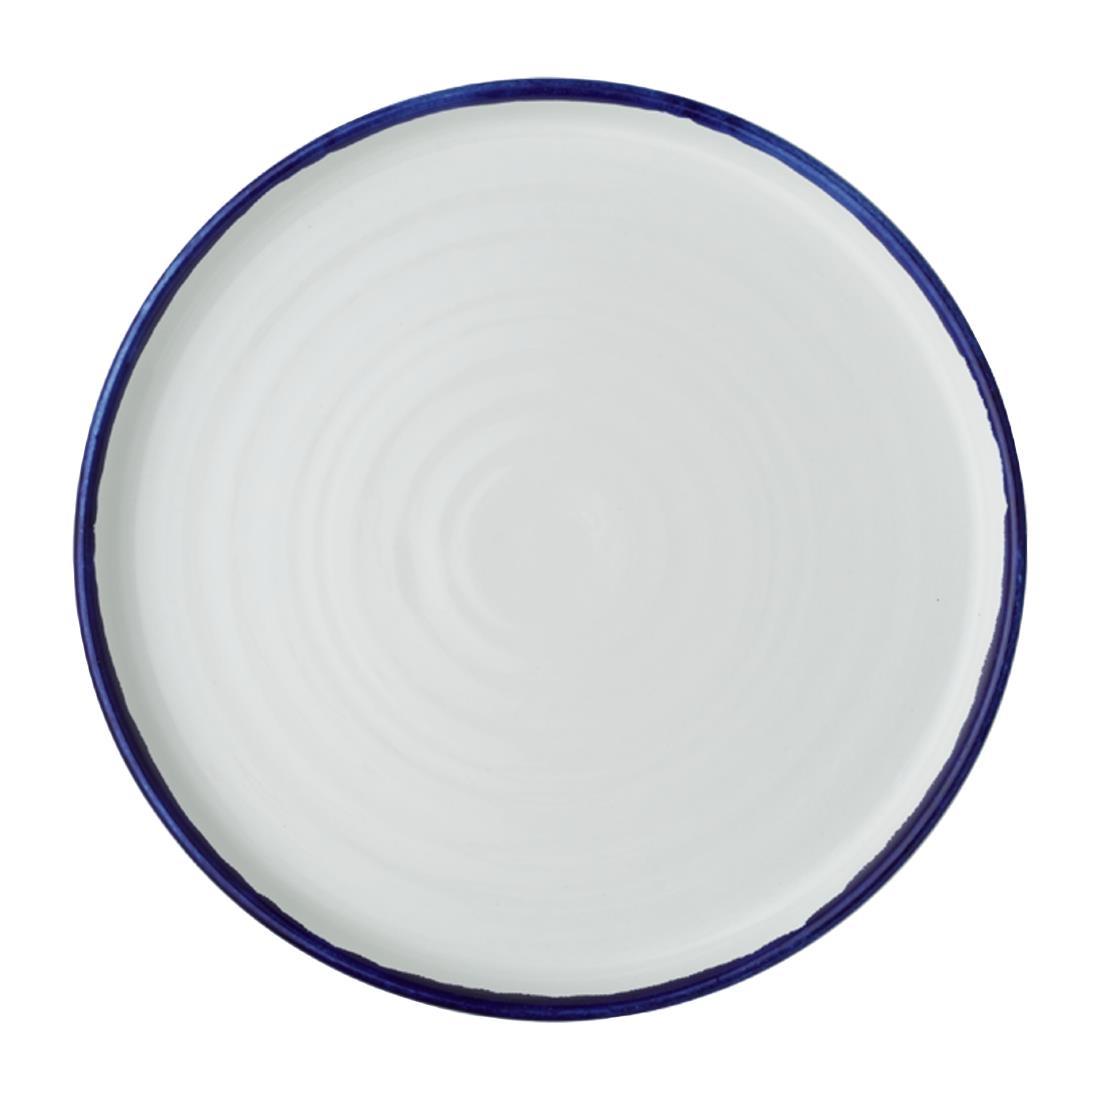 Dudson Harvest Walled Plates Ink 210mm (Pack of 6) - FX152  - 1